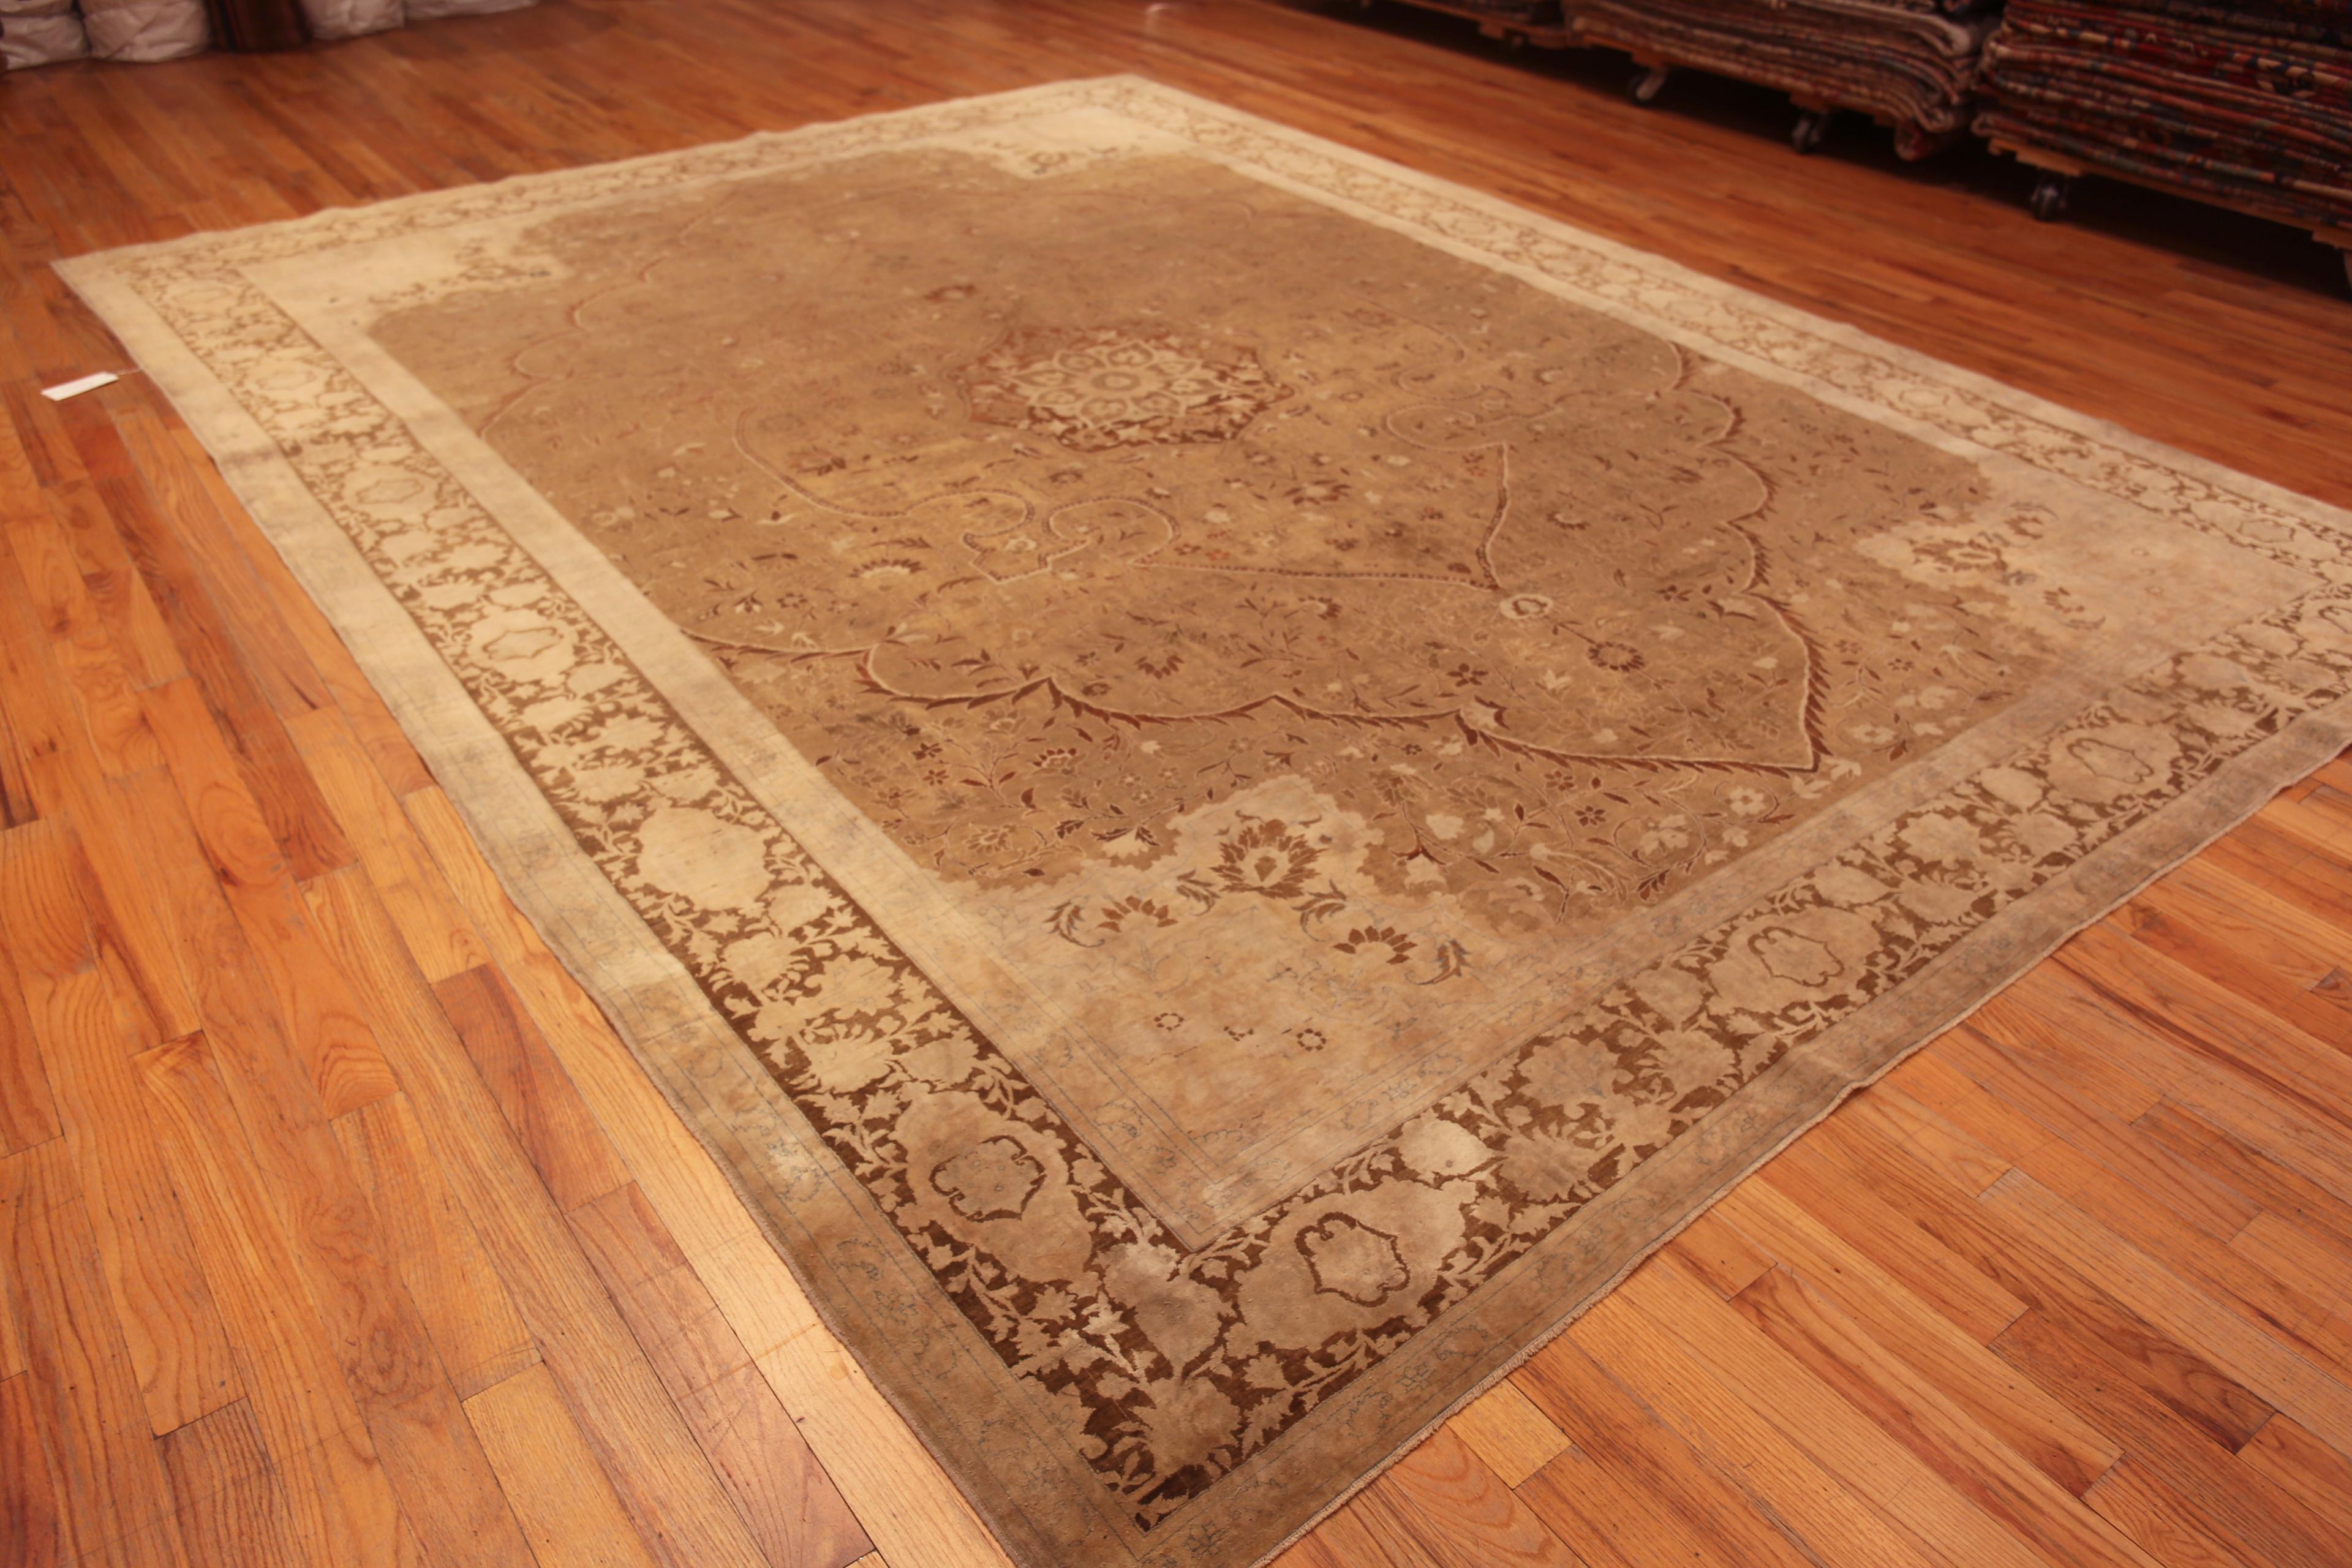 Hand-Knotted Rare Wool and Cotton Pile Fine Weave Antique Persian Tabriz Rug 10'9